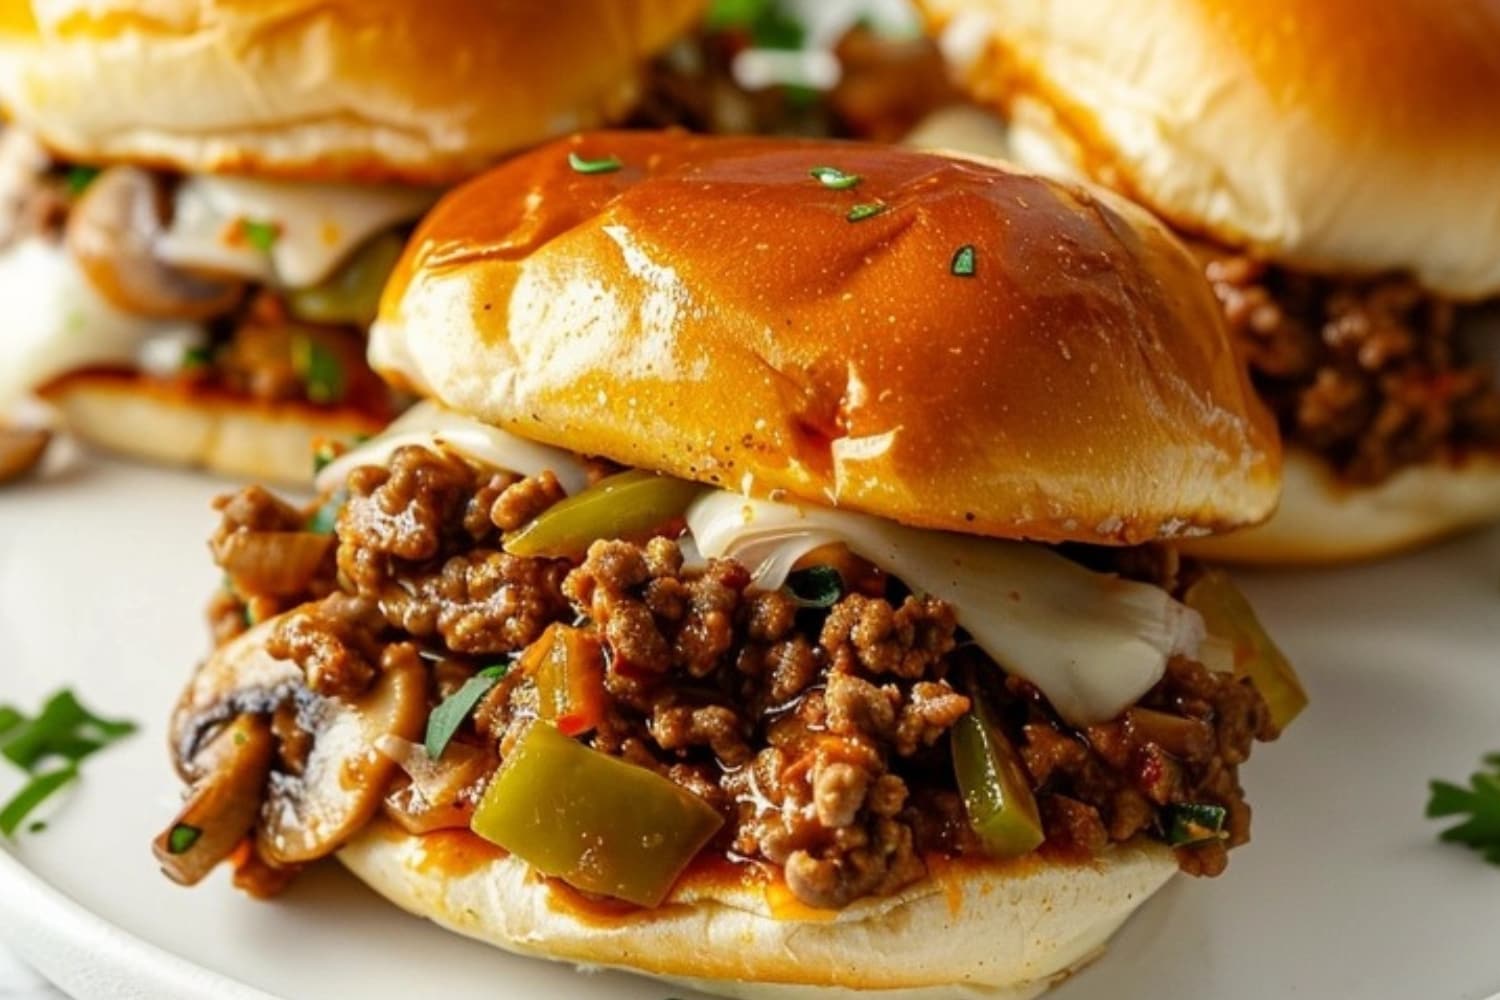 Philly Cheesesteak Sloppy Joes with melted cheese, ground beef, mushroom, onions and green bell pepper.